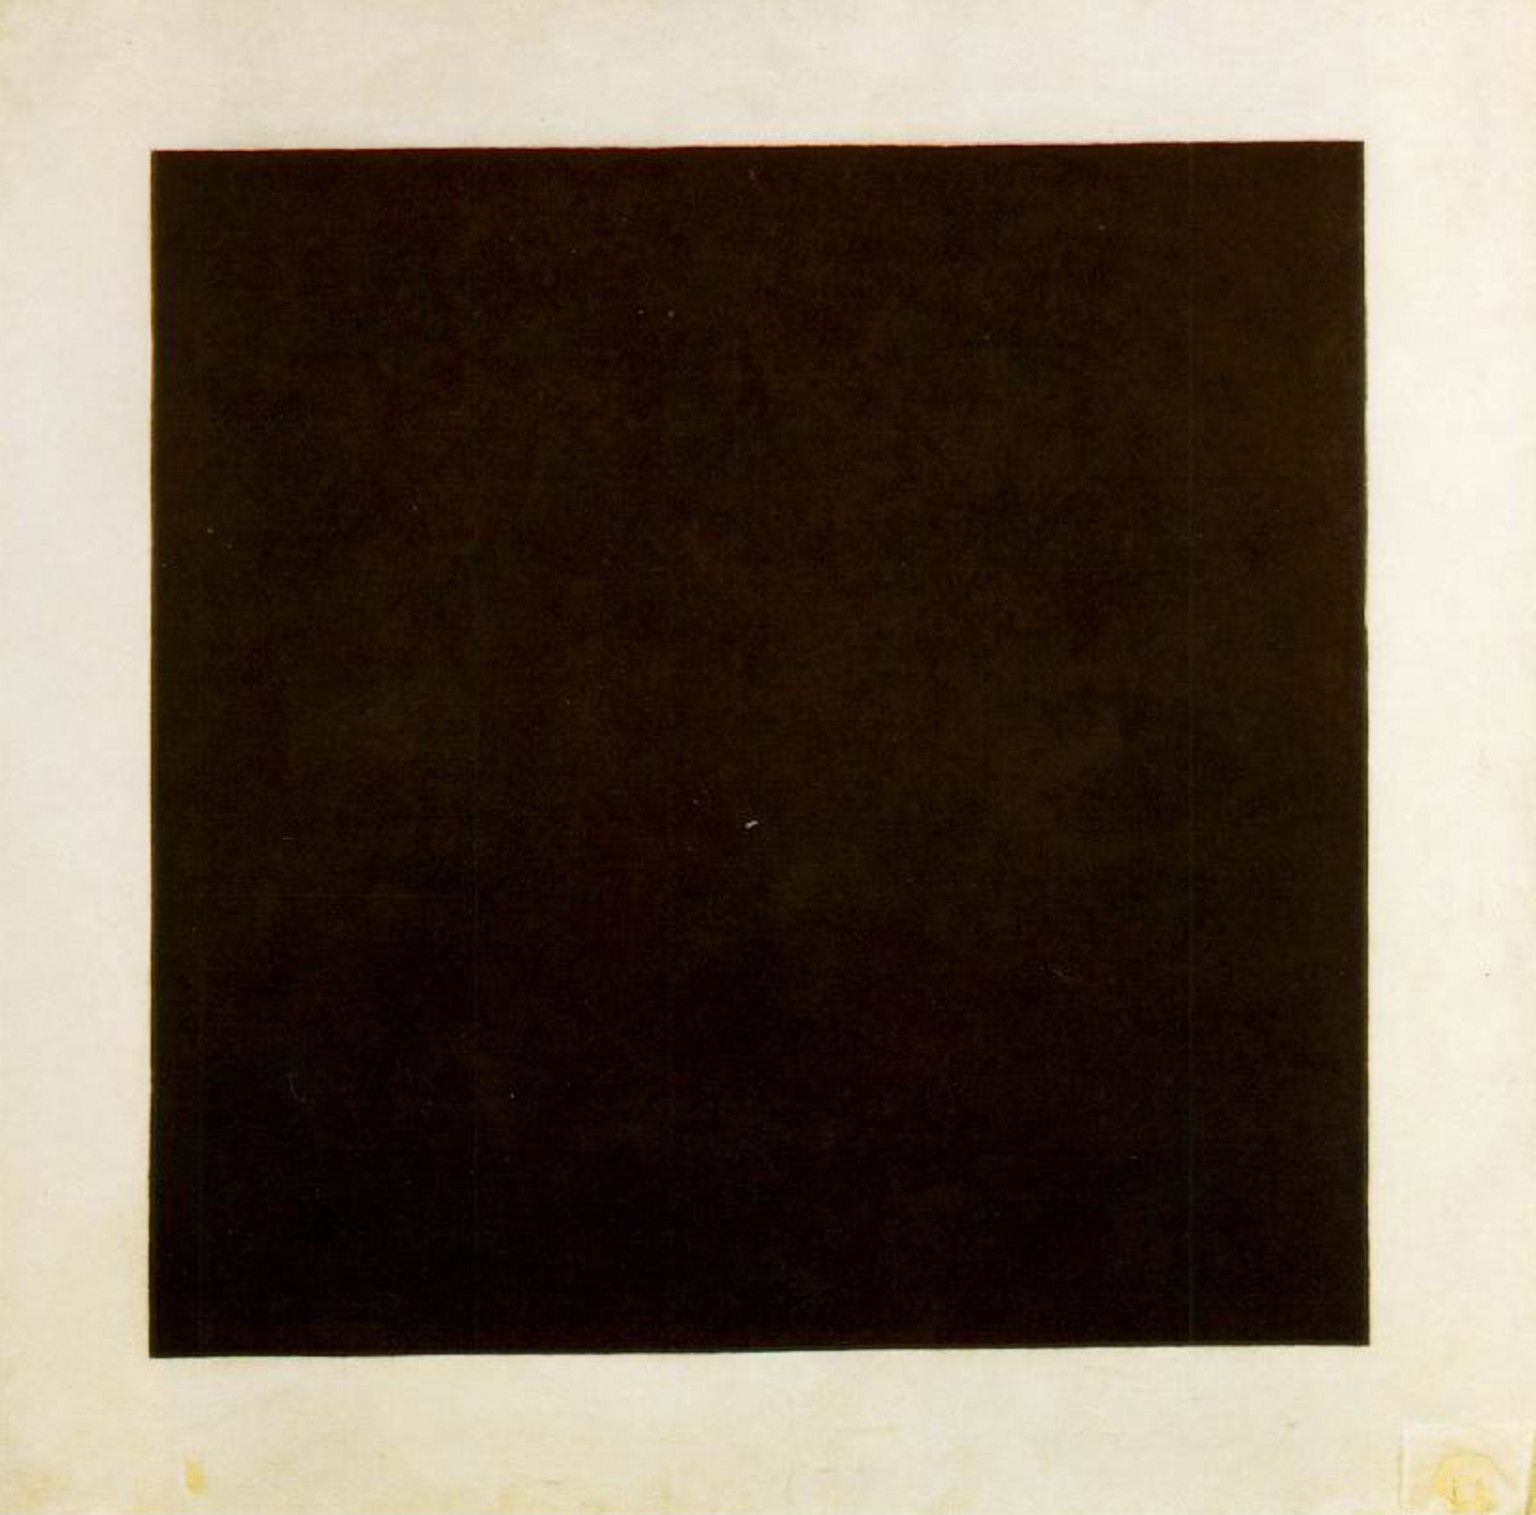 Philip Shaw, 'Kasimir Malevich's Black Square' (The Art of the Sublime)